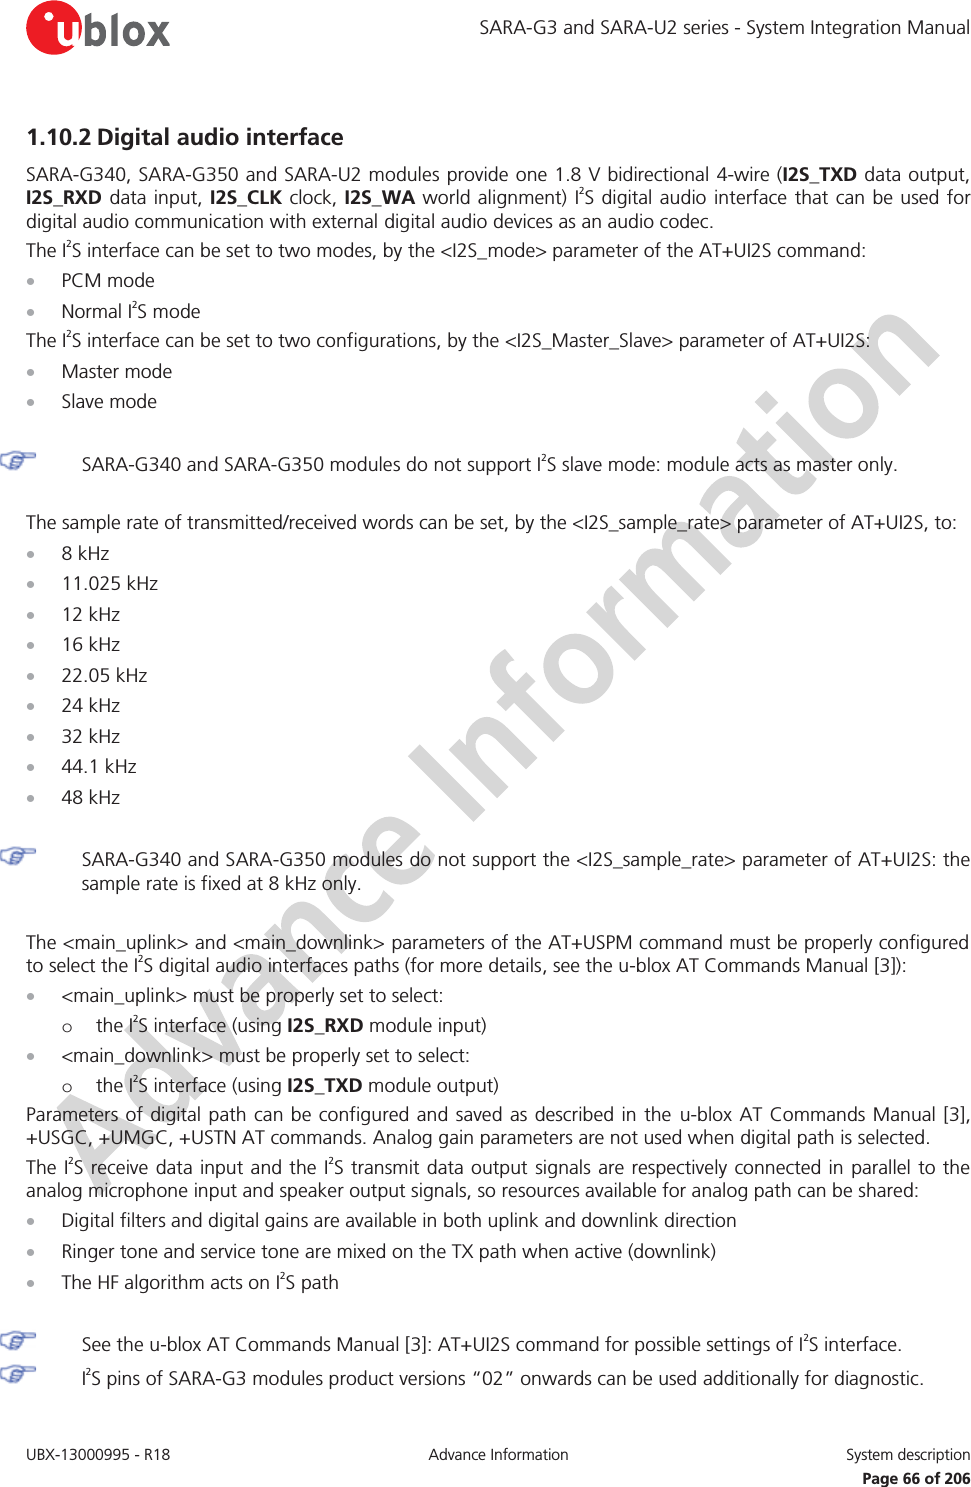 SARA-G3 and SARA-U2 series - System Integration Manual UBX-13000995 - R18  Advance Information  System description   Page 66 of 206 1.10.2 Digital audio interface  SARA-G340, SARA-G350 and SARA-U2 modules provide one 1.8 V bidirectional 4-wire (I2S_TXD data output, I2S_RXD data input, I2S_CLK clock, I2S_WA world alignment) I2S digital audio interface that can be used for digital audio communication with external digital audio devices as an audio codec. The I2S interface can be set to two modes, by the &lt;I2S_mode&gt; parameter of the AT+UI2S command: x PCM mode x Normal I2S mode The I2S interface can be set to two configurations, by the &lt;I2S_Master_Slave&gt; parameter of AT+UI2S: x Master mode x Slave mode   SARA-G340 and SARA-G350 modules do not support I2S slave mode: module acts as master only.  The sample rate of transmitted/received words can be set, by the &lt;I2S_sample_rate&gt; parameter of AT+UI2S, to: x 8 kHz x 11.025 kHz x 12 kHz x 16 kHz x 22.05 kHz x 24 kHz x 32 kHz x 44.1 kHz x 48 kHz   SARA-G340 and SARA-G350 modules do not support the &lt;I2S_sample_rate&gt; parameter of AT+UI2S: the sample rate is fixed at 8 kHz only.  The &lt;main_uplink&gt; and &lt;main_downlink&gt; parameters of the AT+USPM command must be properly configured to select the I2S digital audio interfaces paths (for more details, see the u-blox AT Commands Manual [3]): x &lt;main_uplink&gt; must be properly set to select: o the I2S interface (using I2S_RXD module input) x &lt;main_downlink&gt; must be properly set to select: o the I2S interface (using I2S_TXD module output) Parameters of digital path can be configured and saved as described in the u-blox AT Commands Manual [3], +USGC, +UMGC, +USTN AT commands. Analog gain parameters are not used when digital path is selected. The I2S receive data input and the I2S transmit data output signals are respectively connected in parallel to the analog microphone input and speaker output signals, so resources available for analog path can be shared: x Digital filters and digital gains are available in both uplink and downlink direction x Ringer tone and service tone are mixed on the TX path when active (downlink) x The HF algorithm acts on I2S path   See the u-blox AT Commands Manual [3]: AT+UI2S command for possible settings of I2S interface.  I2S pins of SARA-G3 modules product versions “02” onwards can be used additionally for diagnostic. 